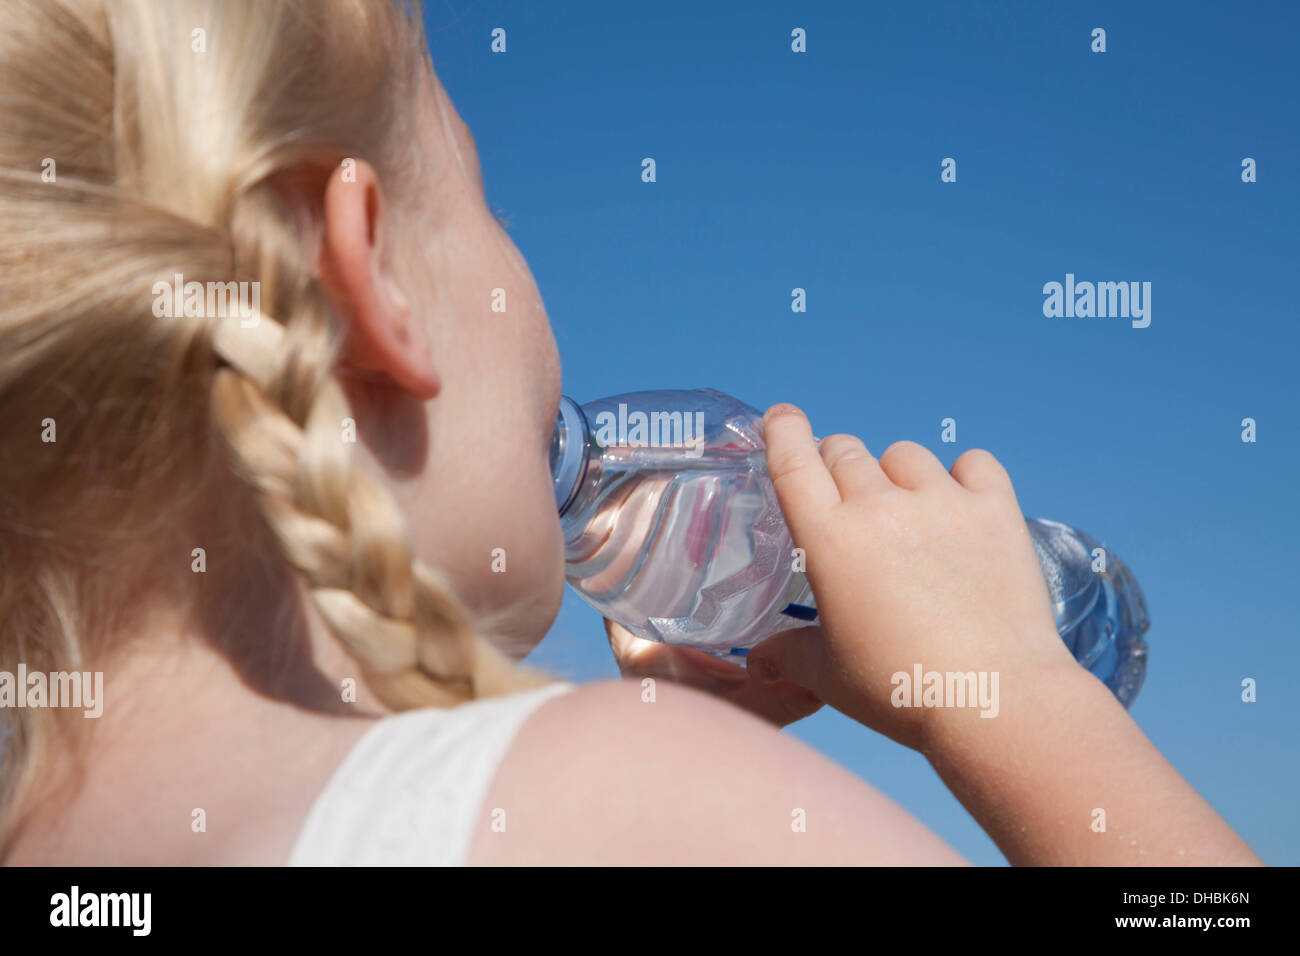 A young child with blonde hair in pigtails, drinking water from a clear bottle. Stock Photo